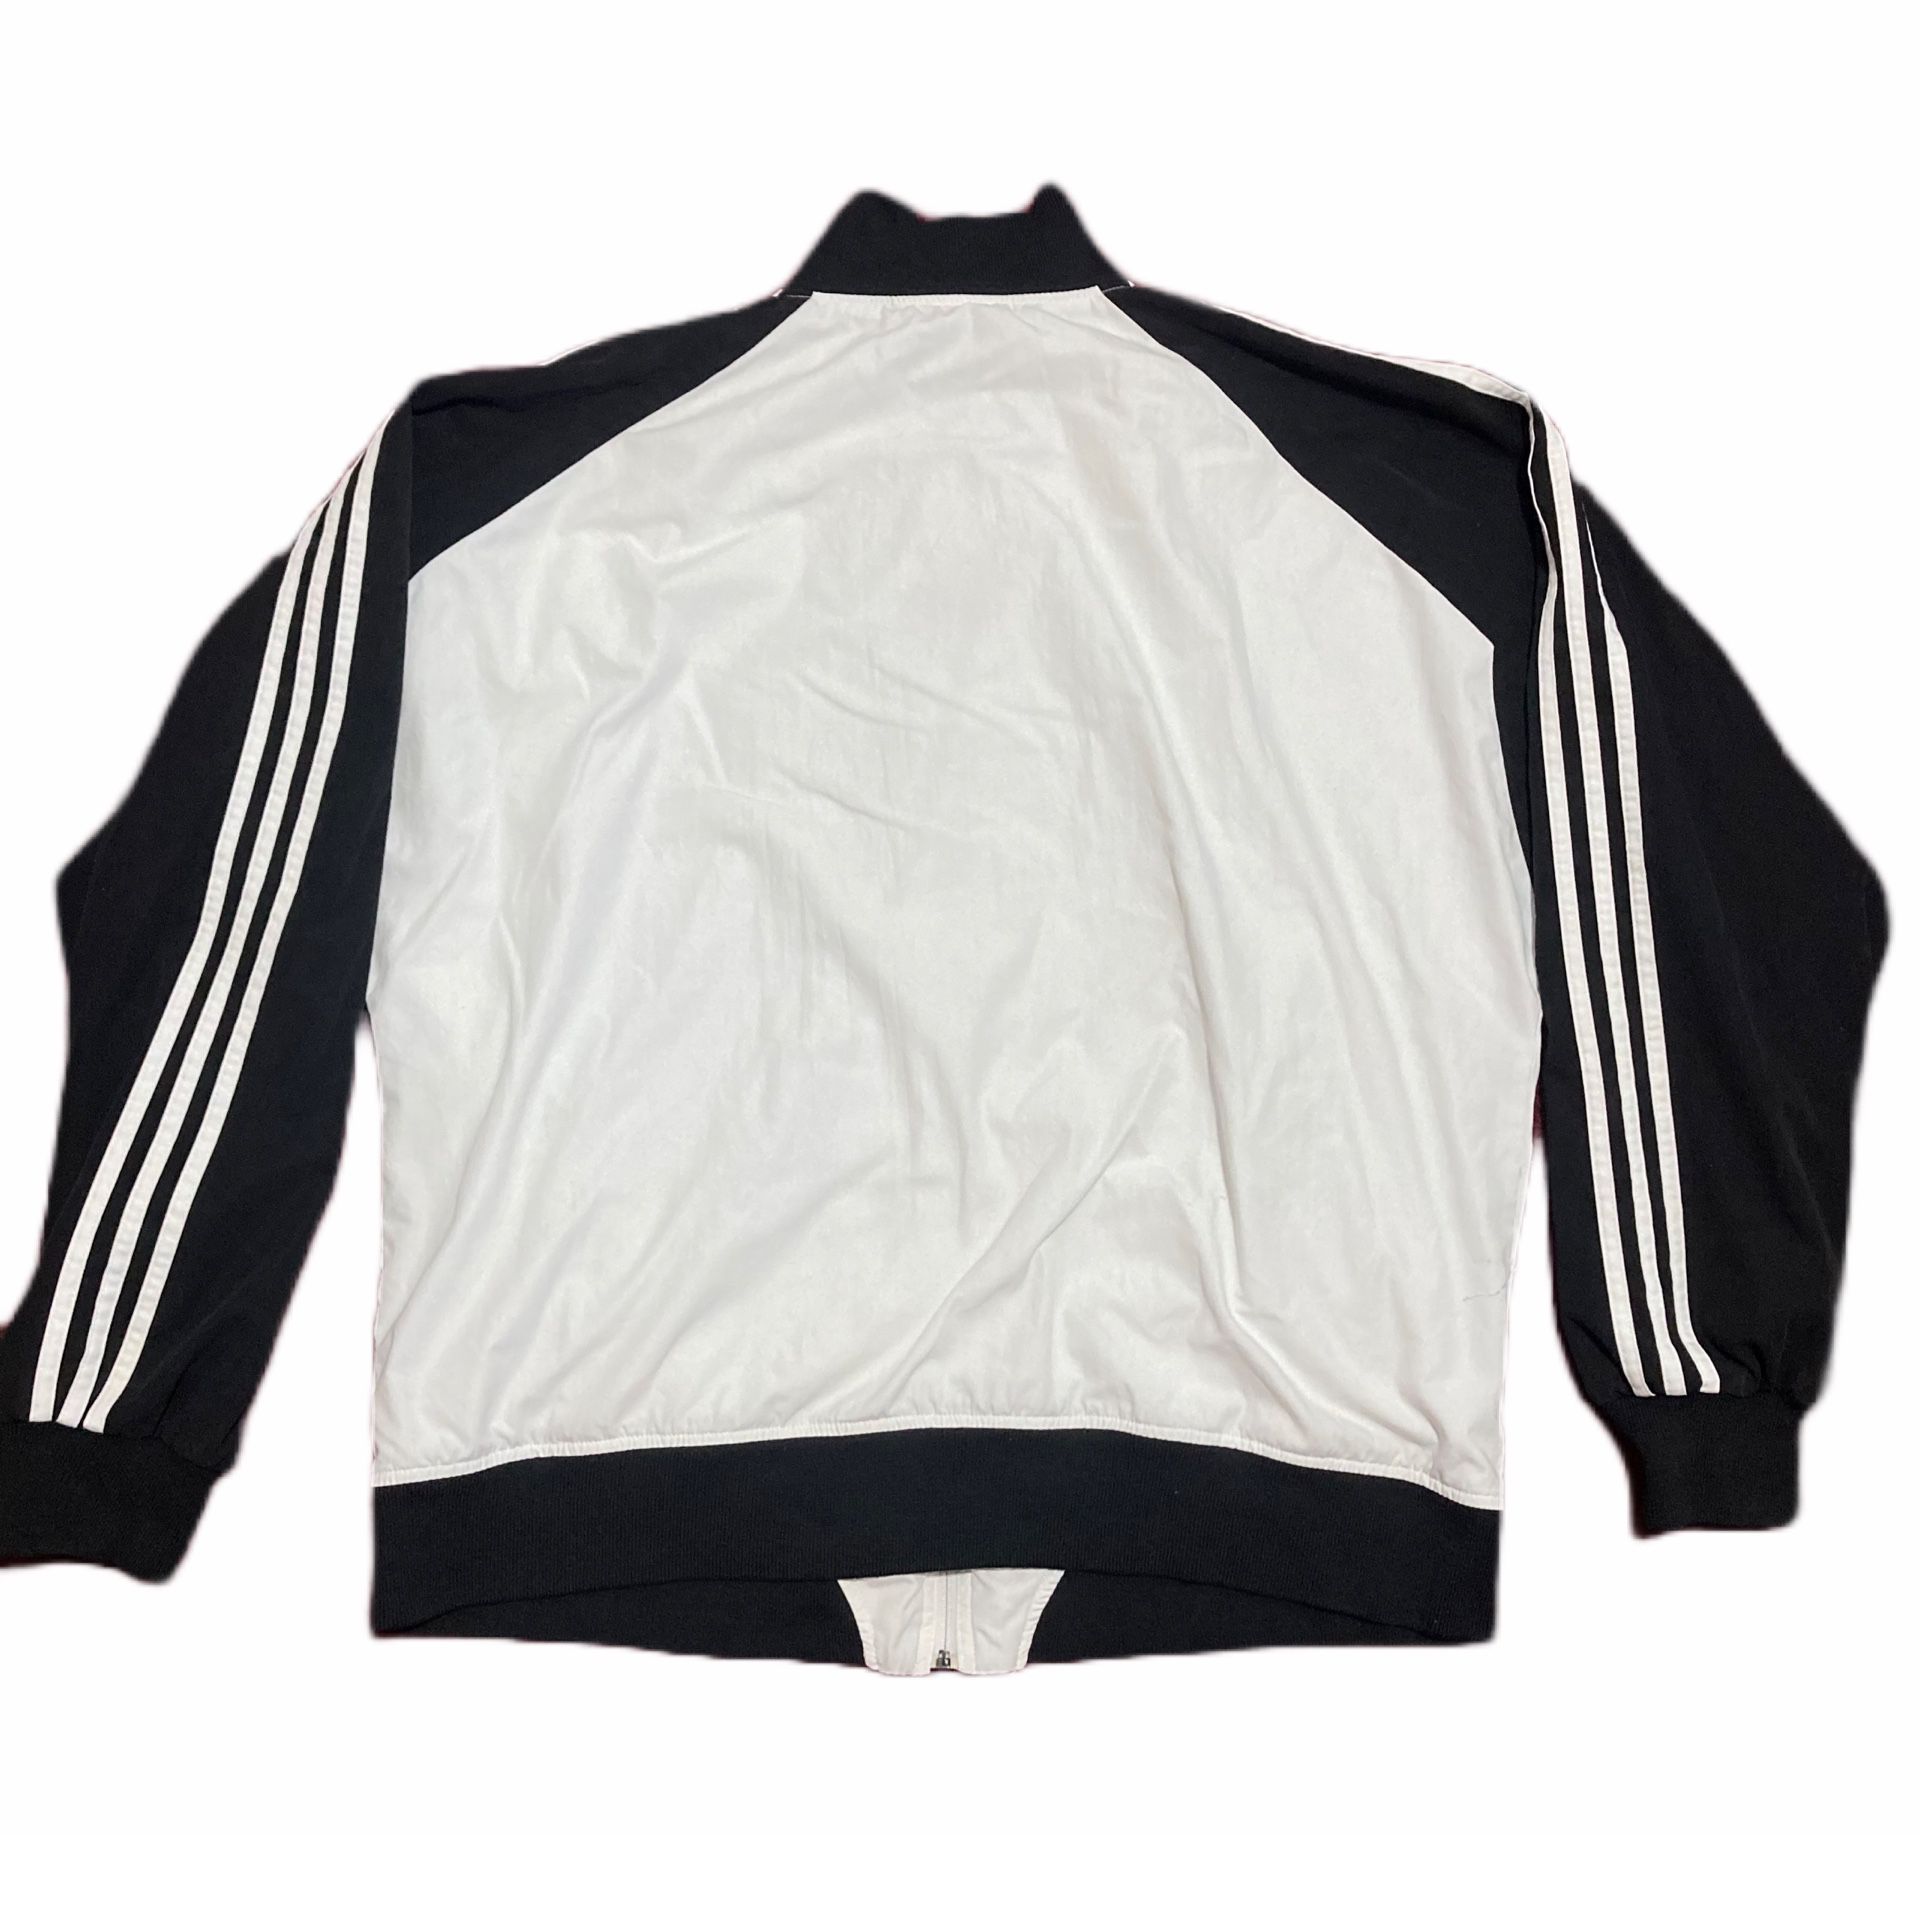 Vintage ADIDAS ATP Mens L Old Track Jacket 90s Full Zip White for Sale in WA - OfferUp